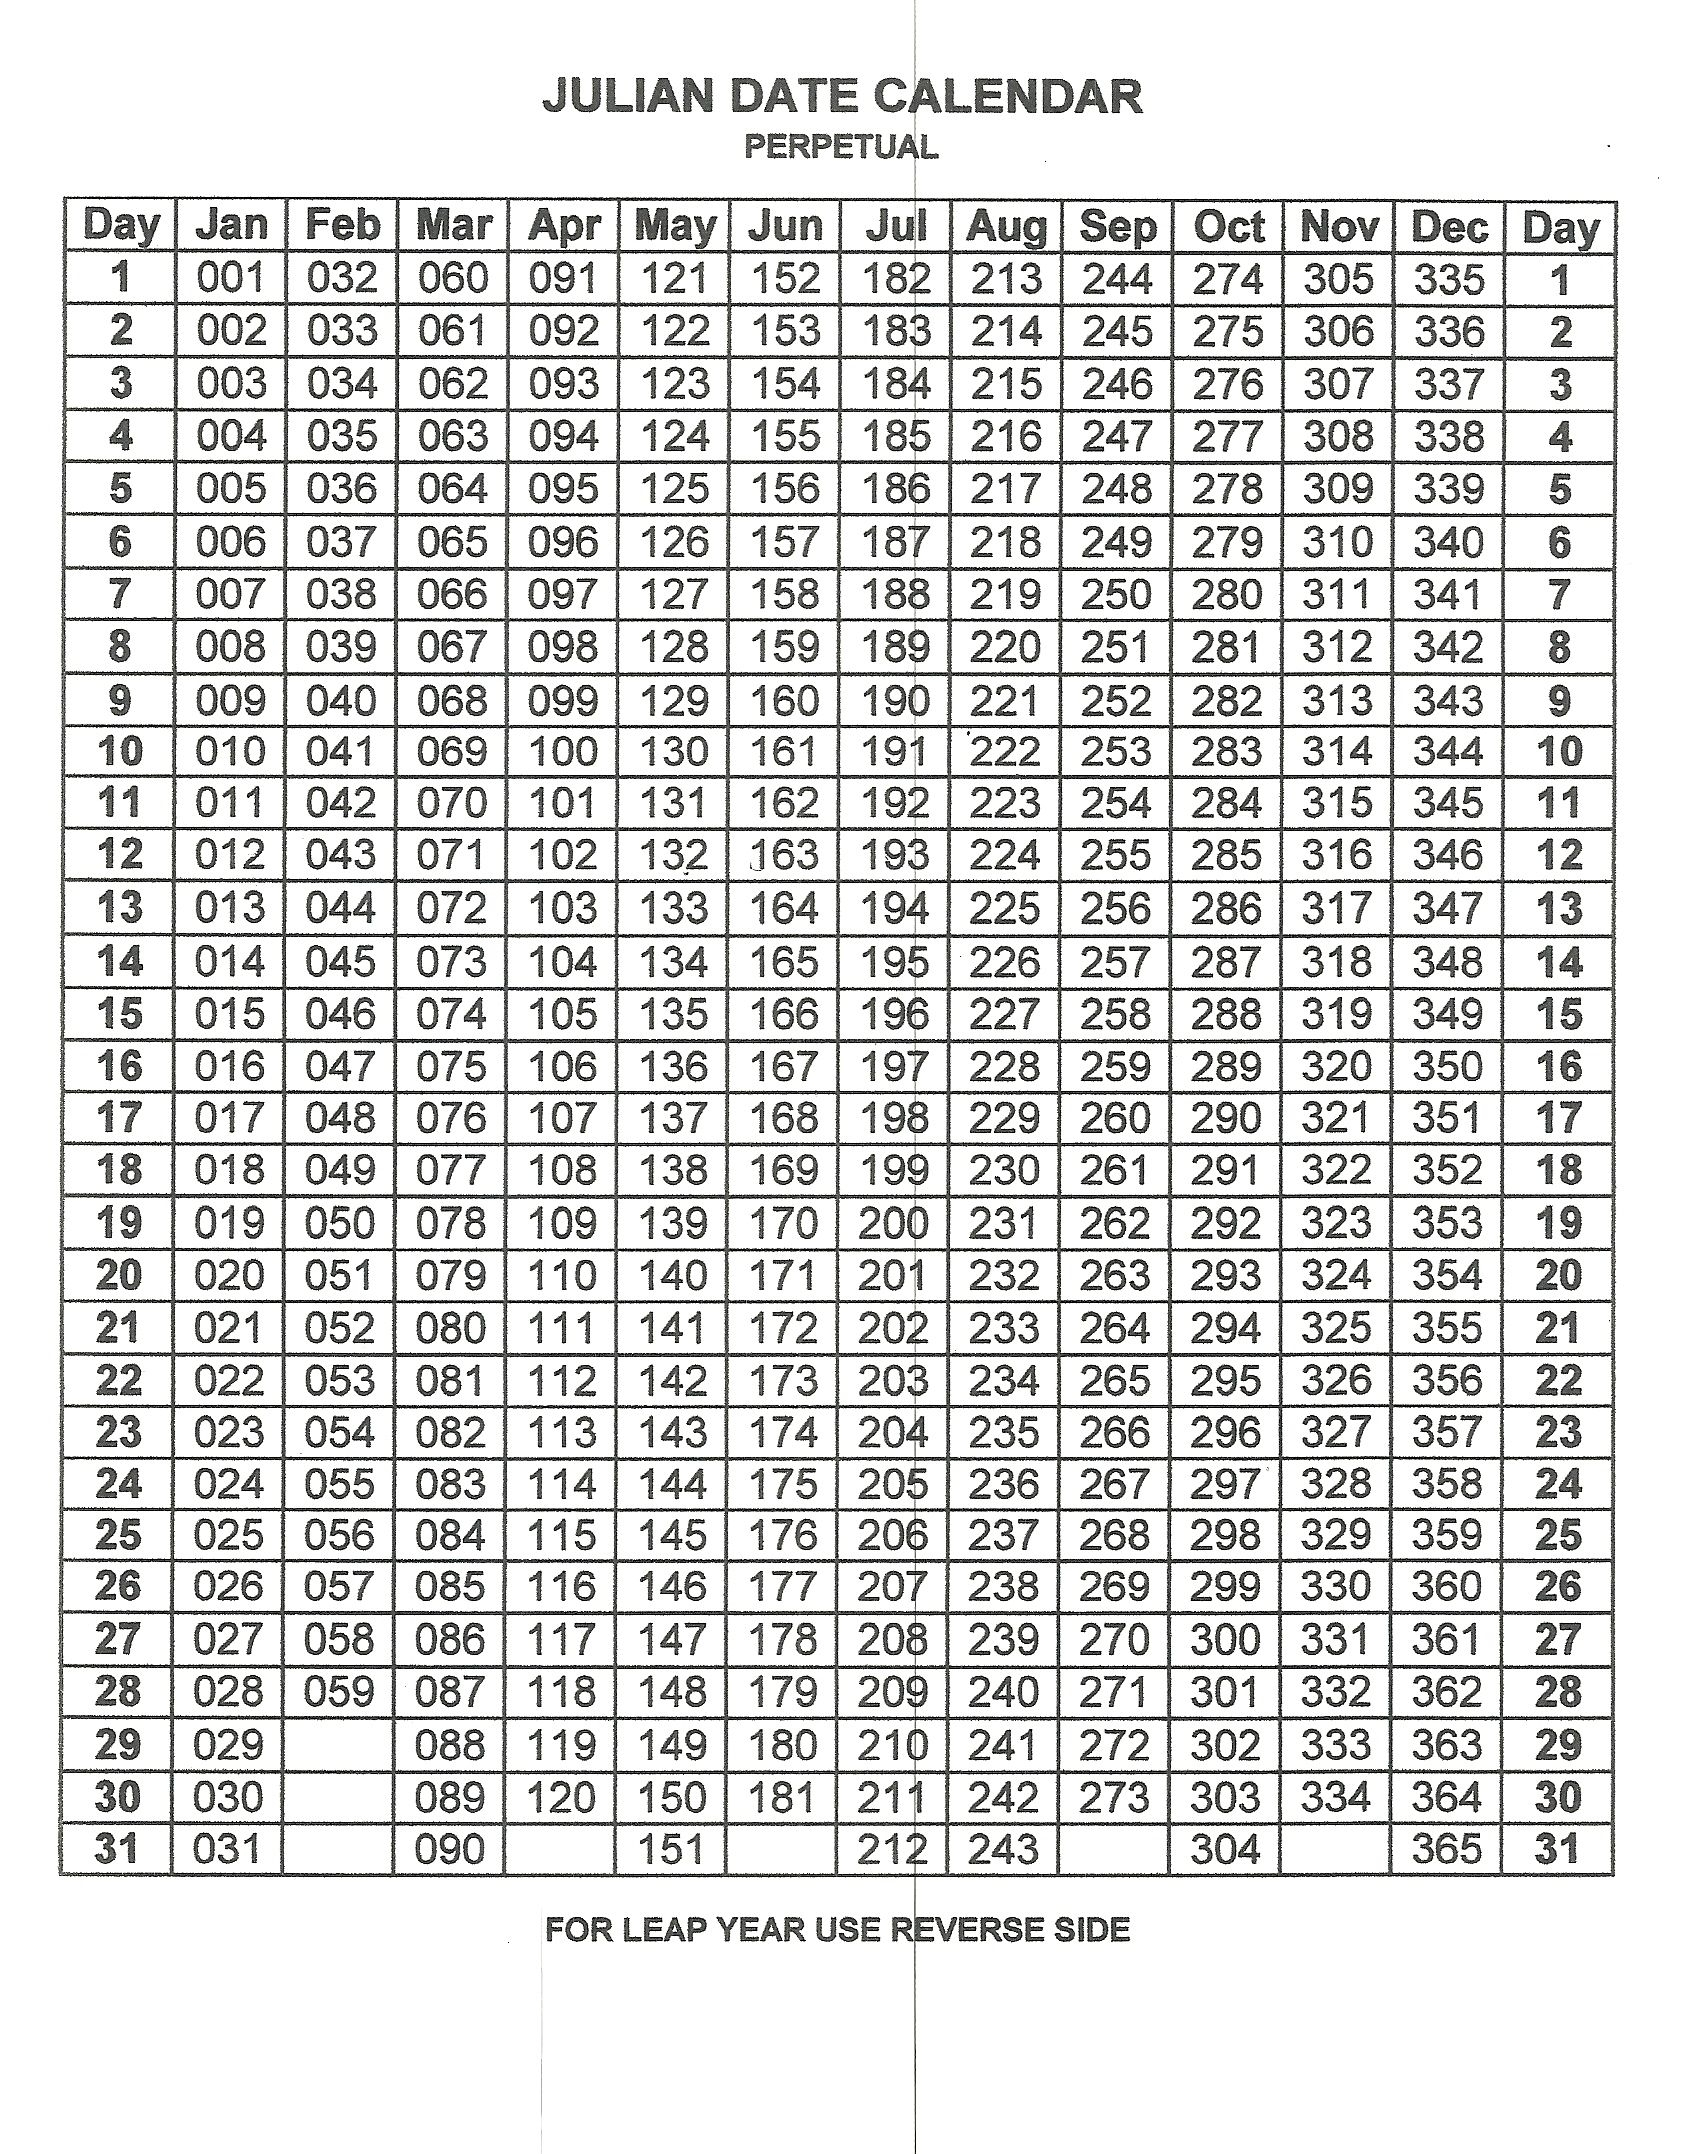 Julian Date Calender For Leap Years Printable  Calendar pertaining to Leap Year Julian Calendar